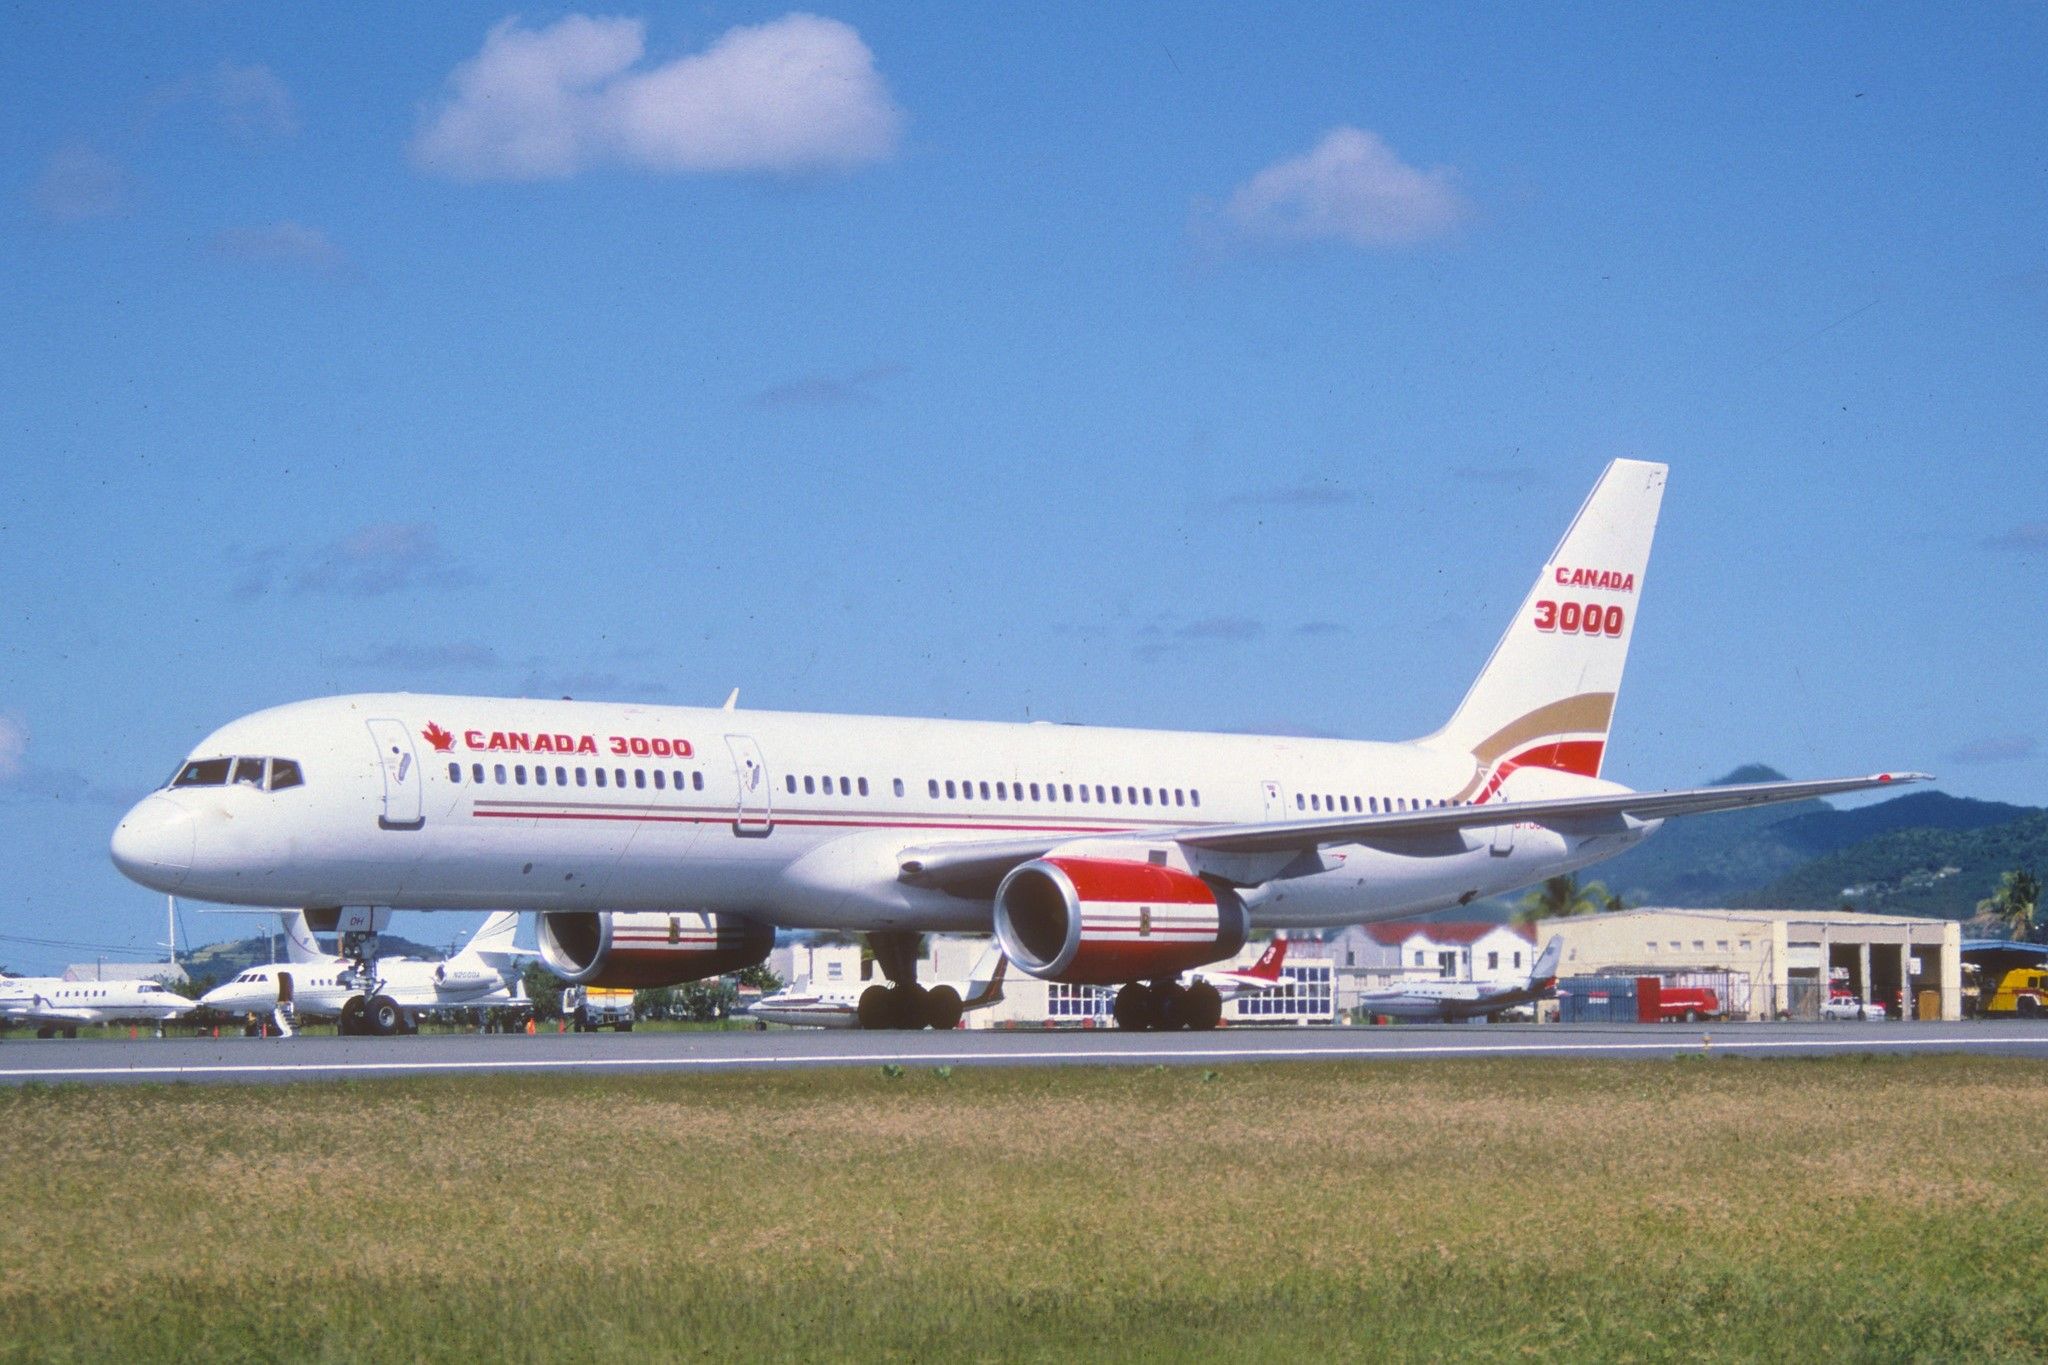 A Canada 3000 Boeing 757 on an airport apron.